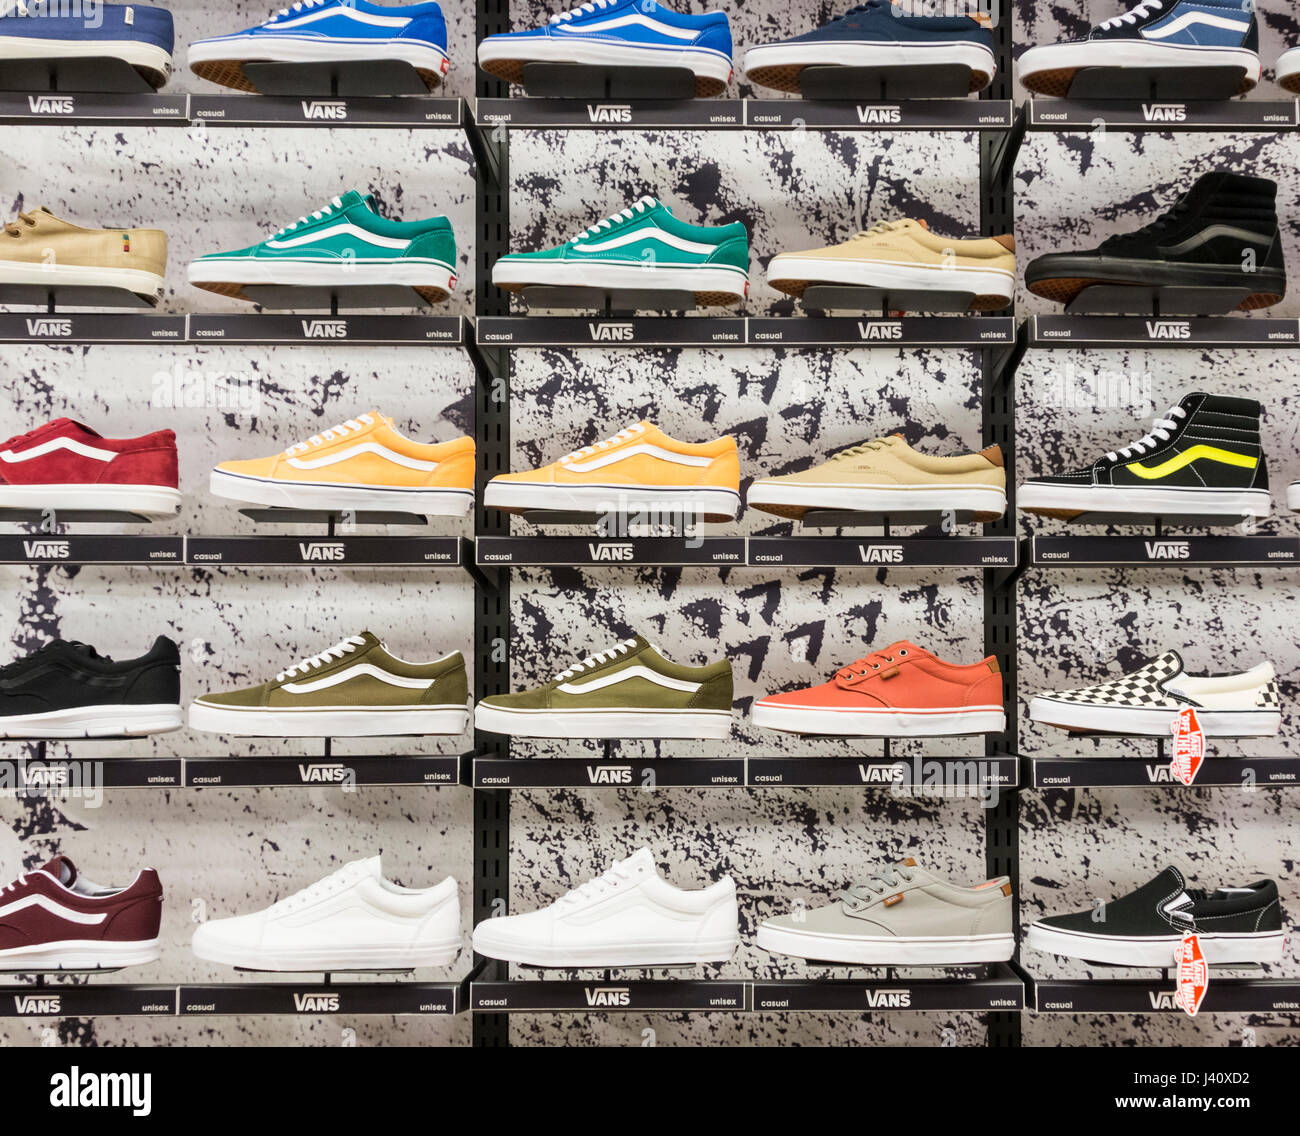 Vans trainers display in department store Stock Photo - Alamy